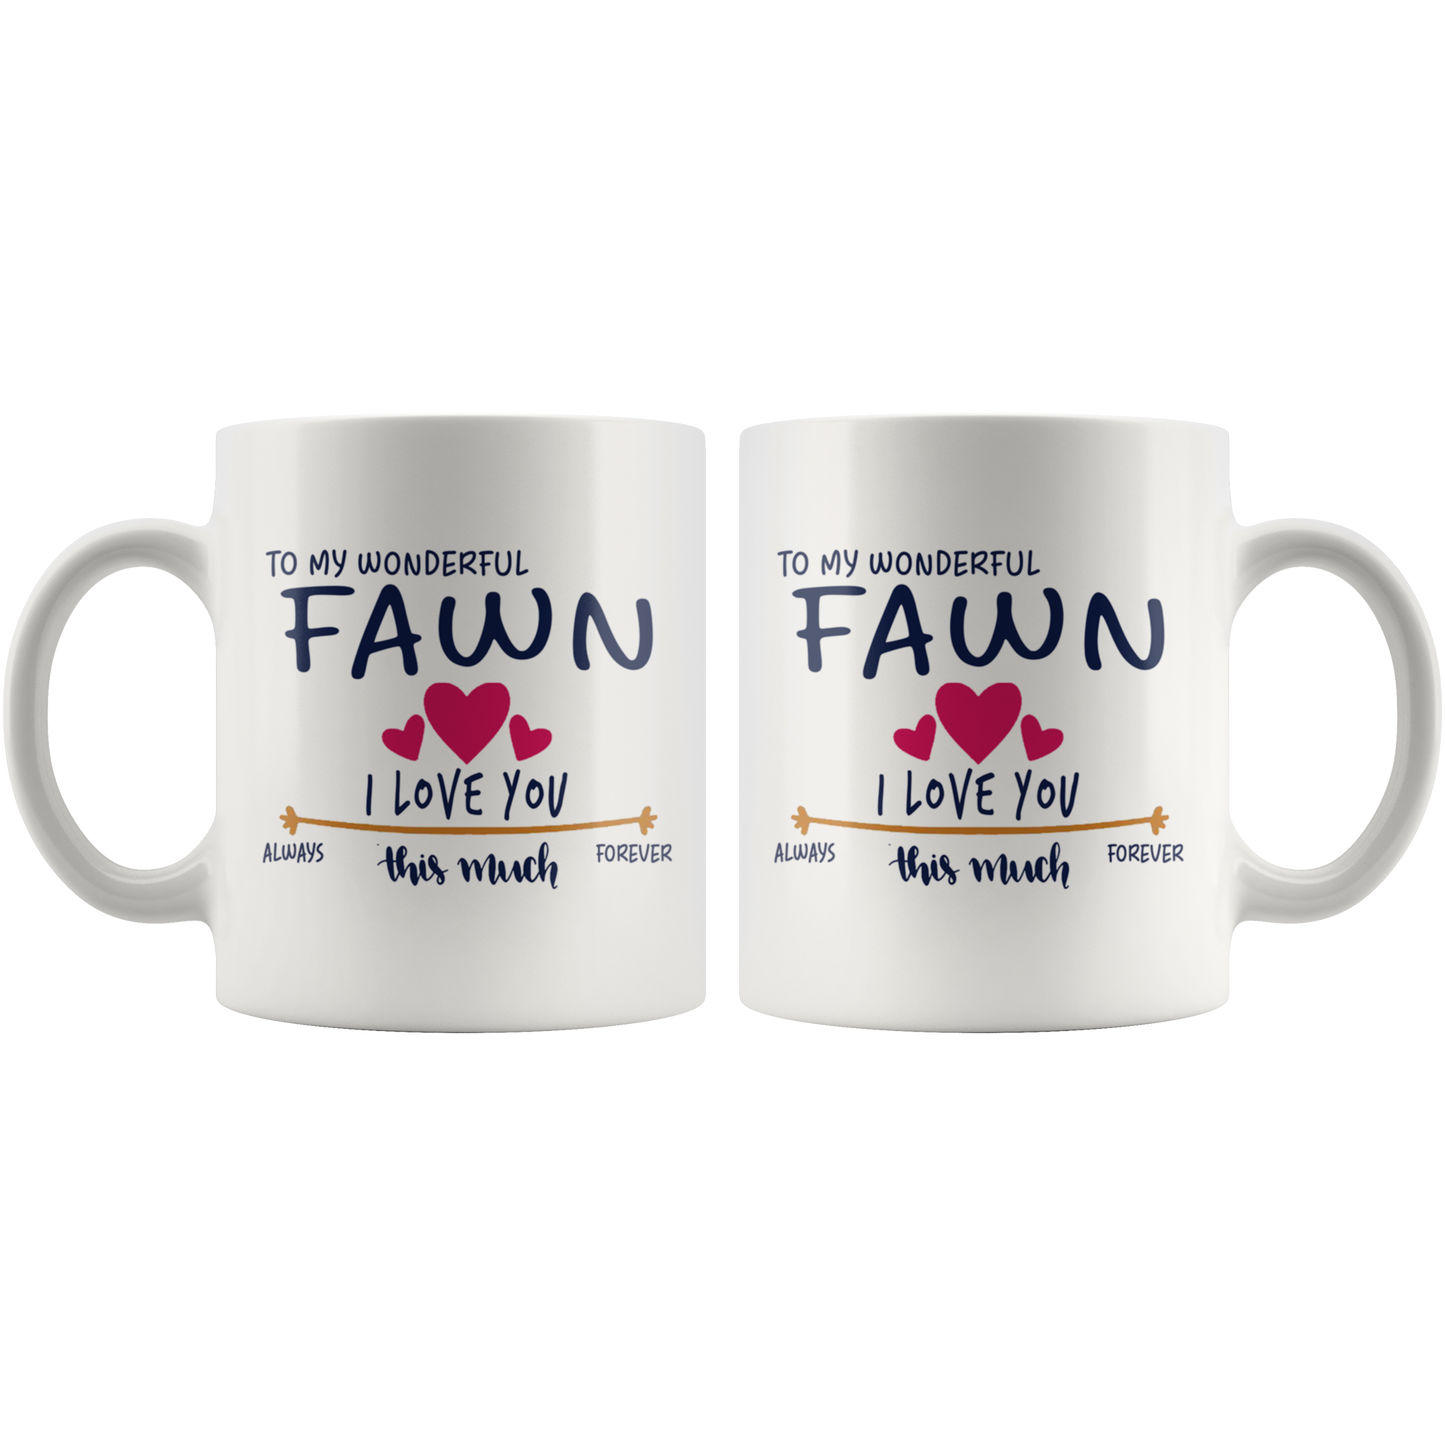 M-20754026-sp-18458 - Romantic Gifts For Him And Her - To My Wonderful Fawn I Love